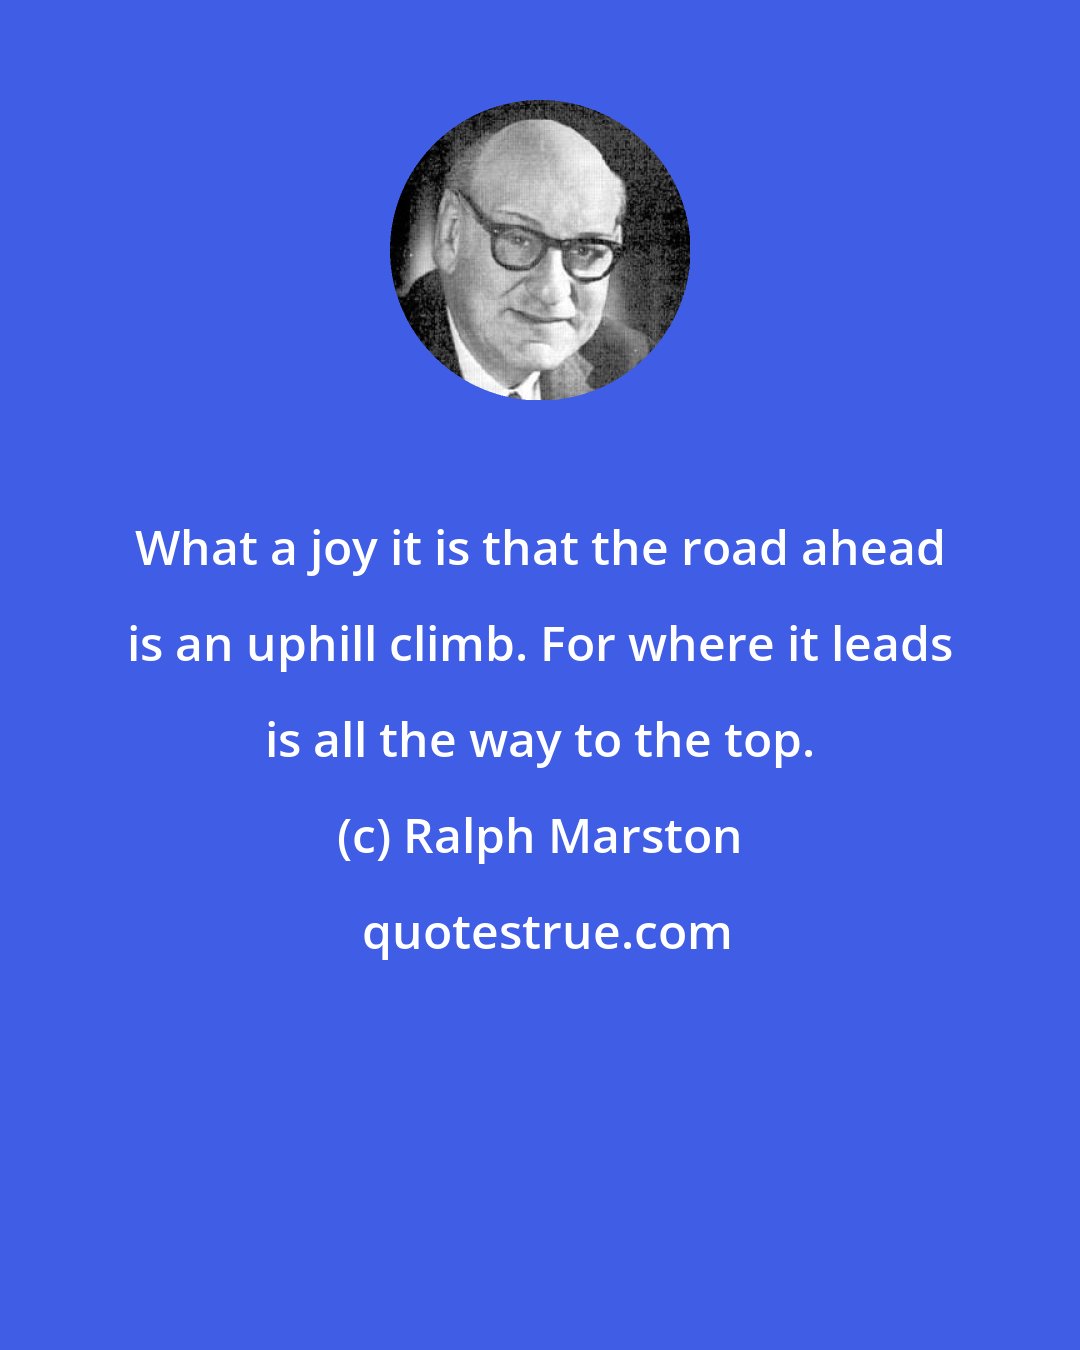 Ralph Marston: What a joy it is that the road ahead is an uphill climb. For where it leads is all the way to the top.